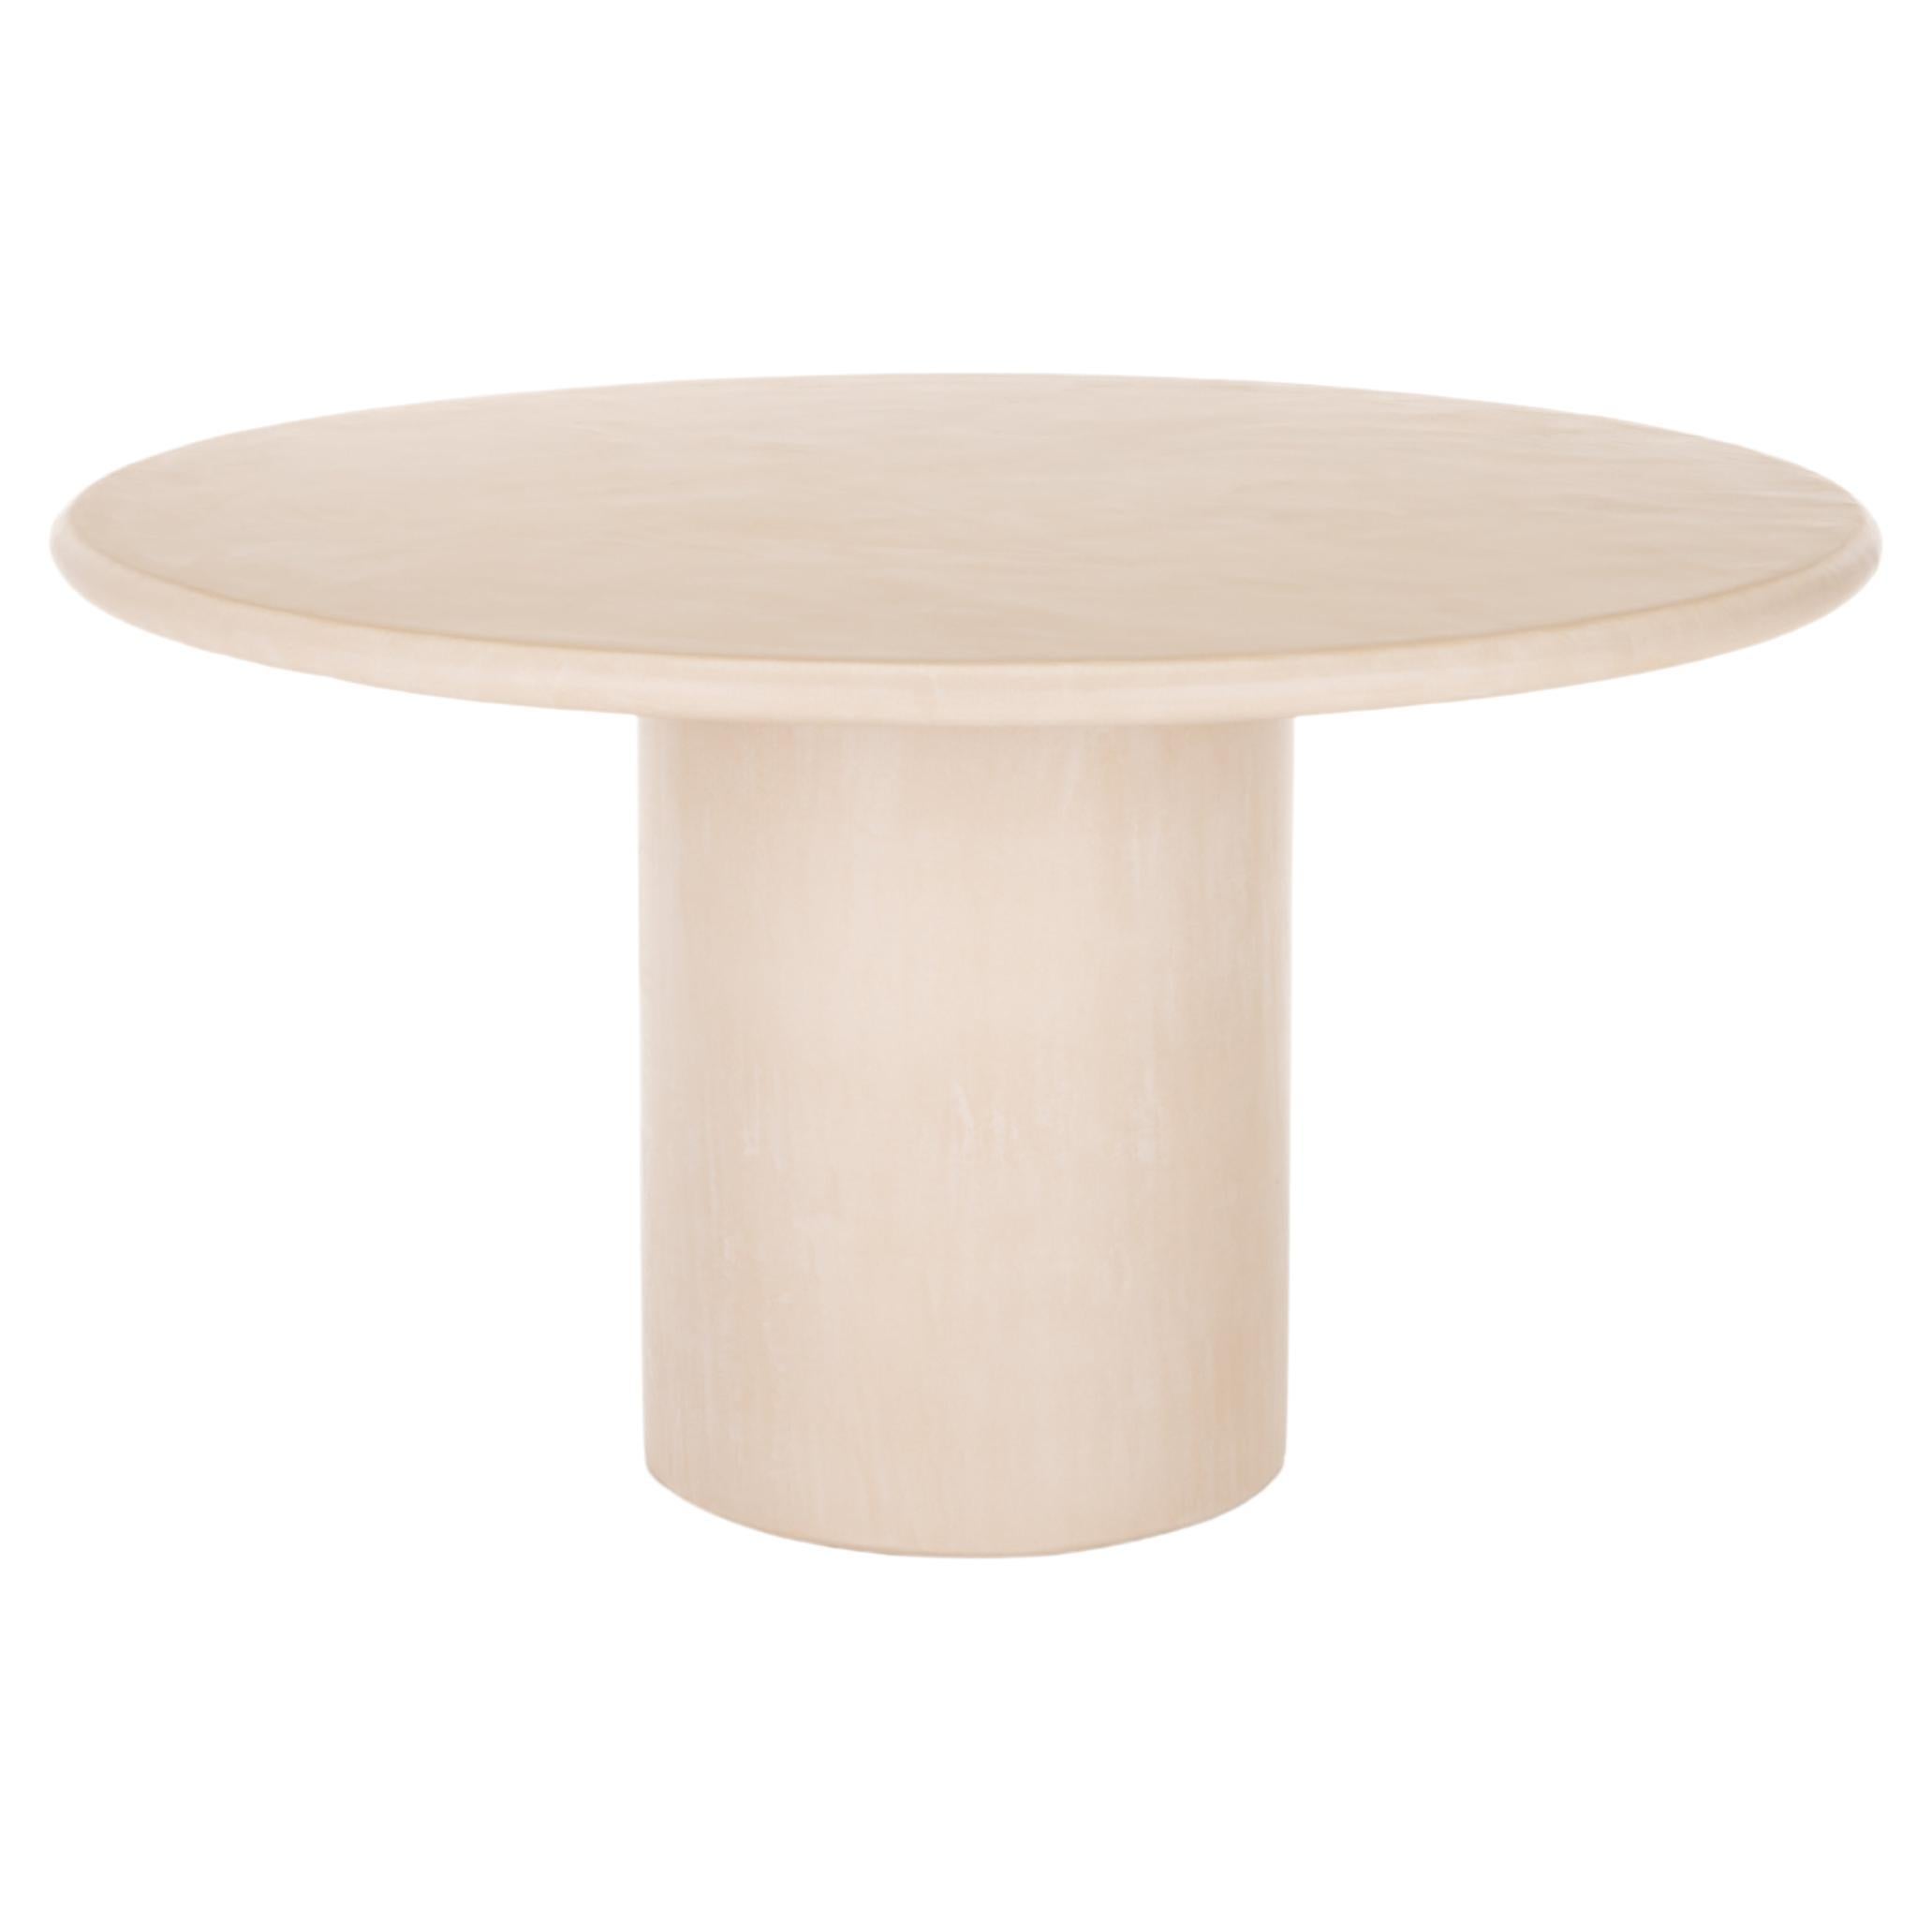 Contemporary Round Natural Plaster "Column" Table 140cm by Isabelle Beaumont